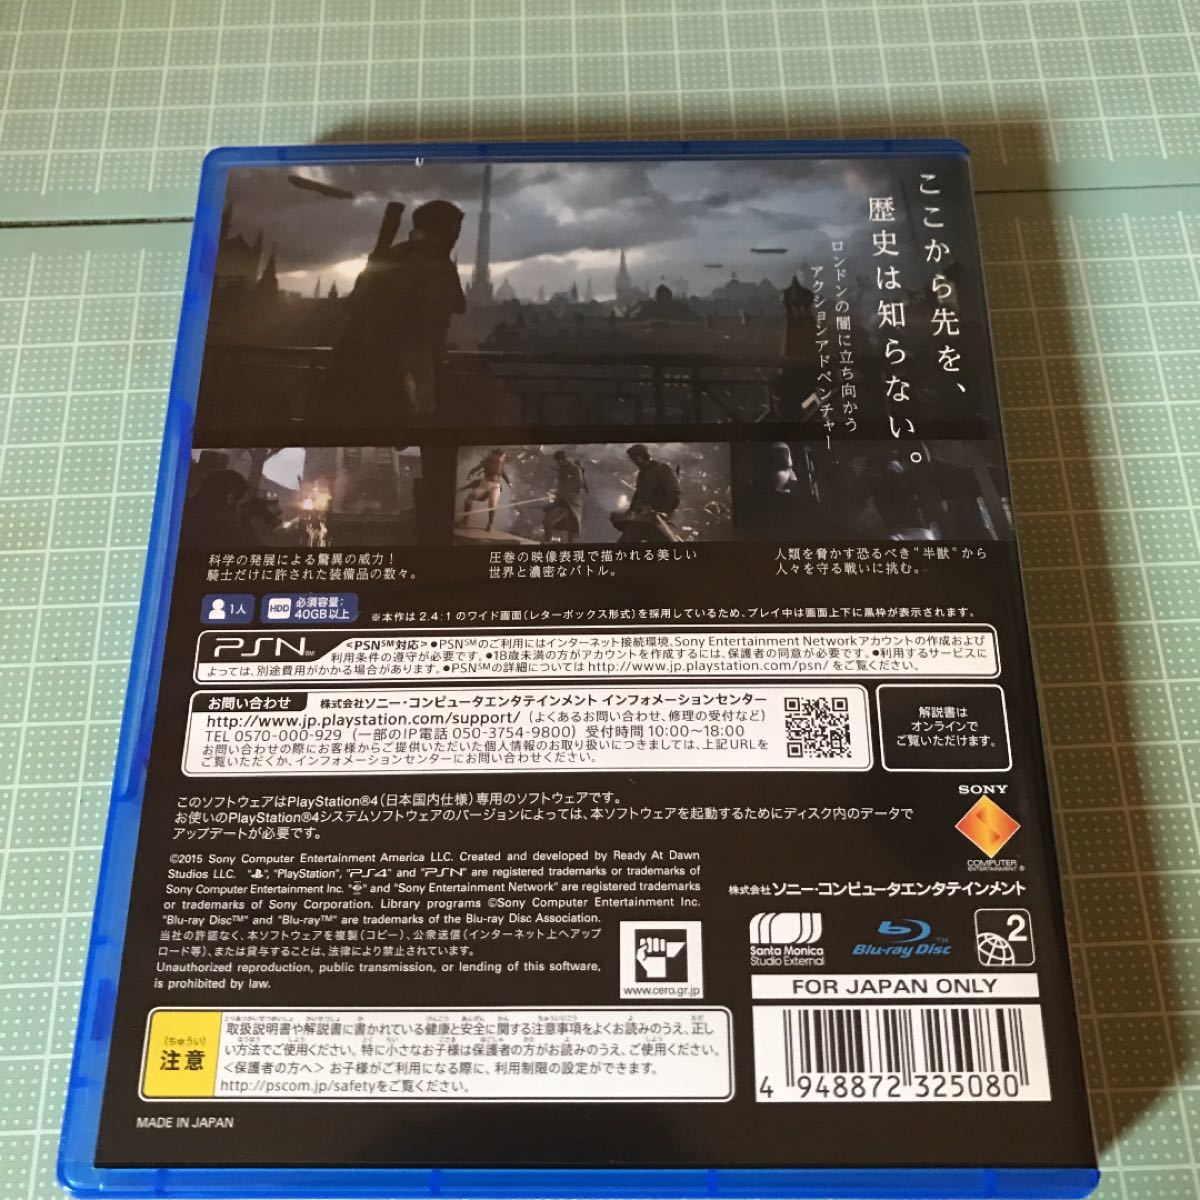 【PS4】 The Order： 1886 [通常版］